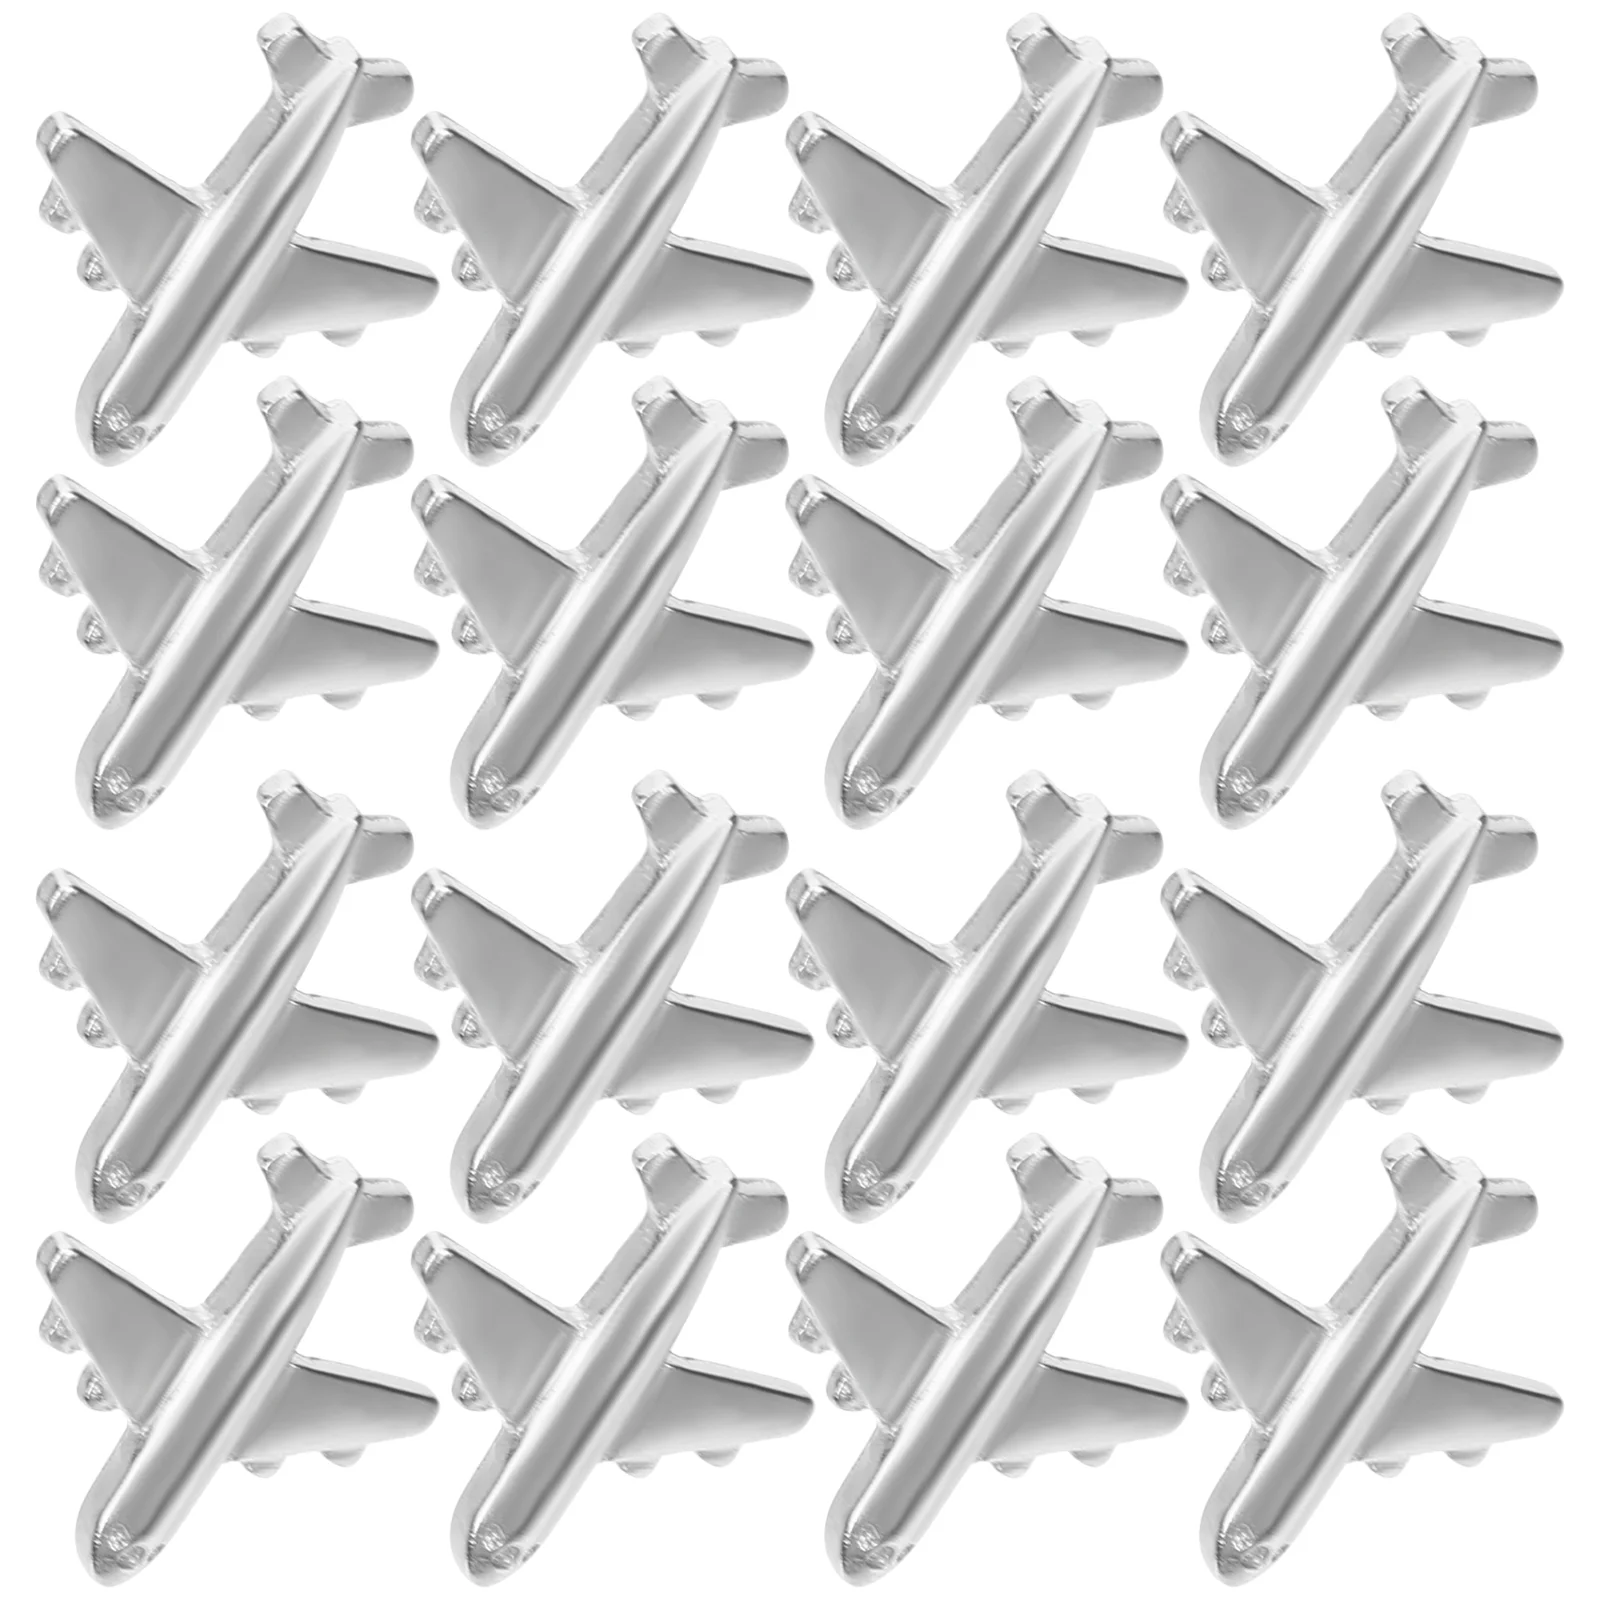 

12 Pcs Aircraft Pushpin Map Thumbnails Accessories for Cute Pins Paper Airplane